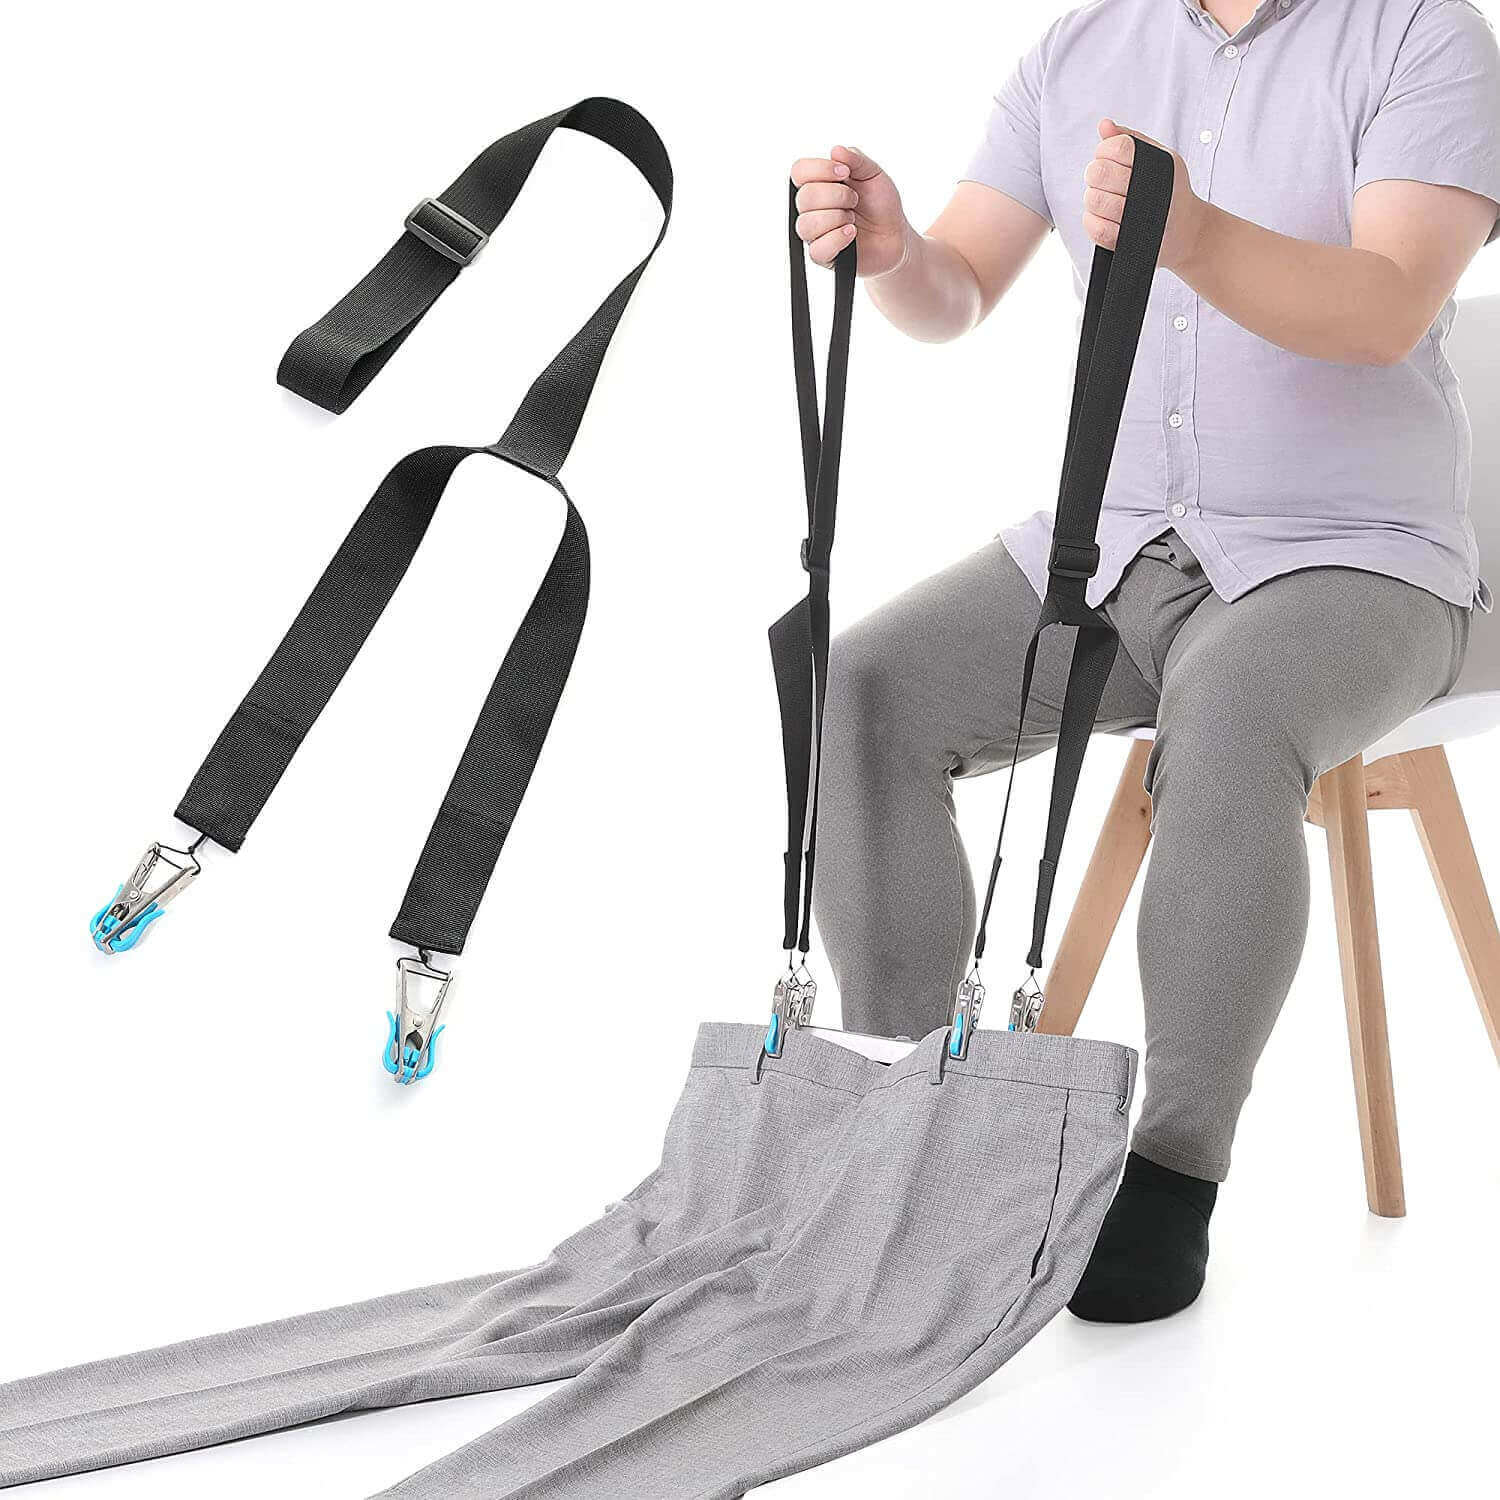 Clip and Pull Dressing Aid for Pants, Assist Tool to Pull up Pants